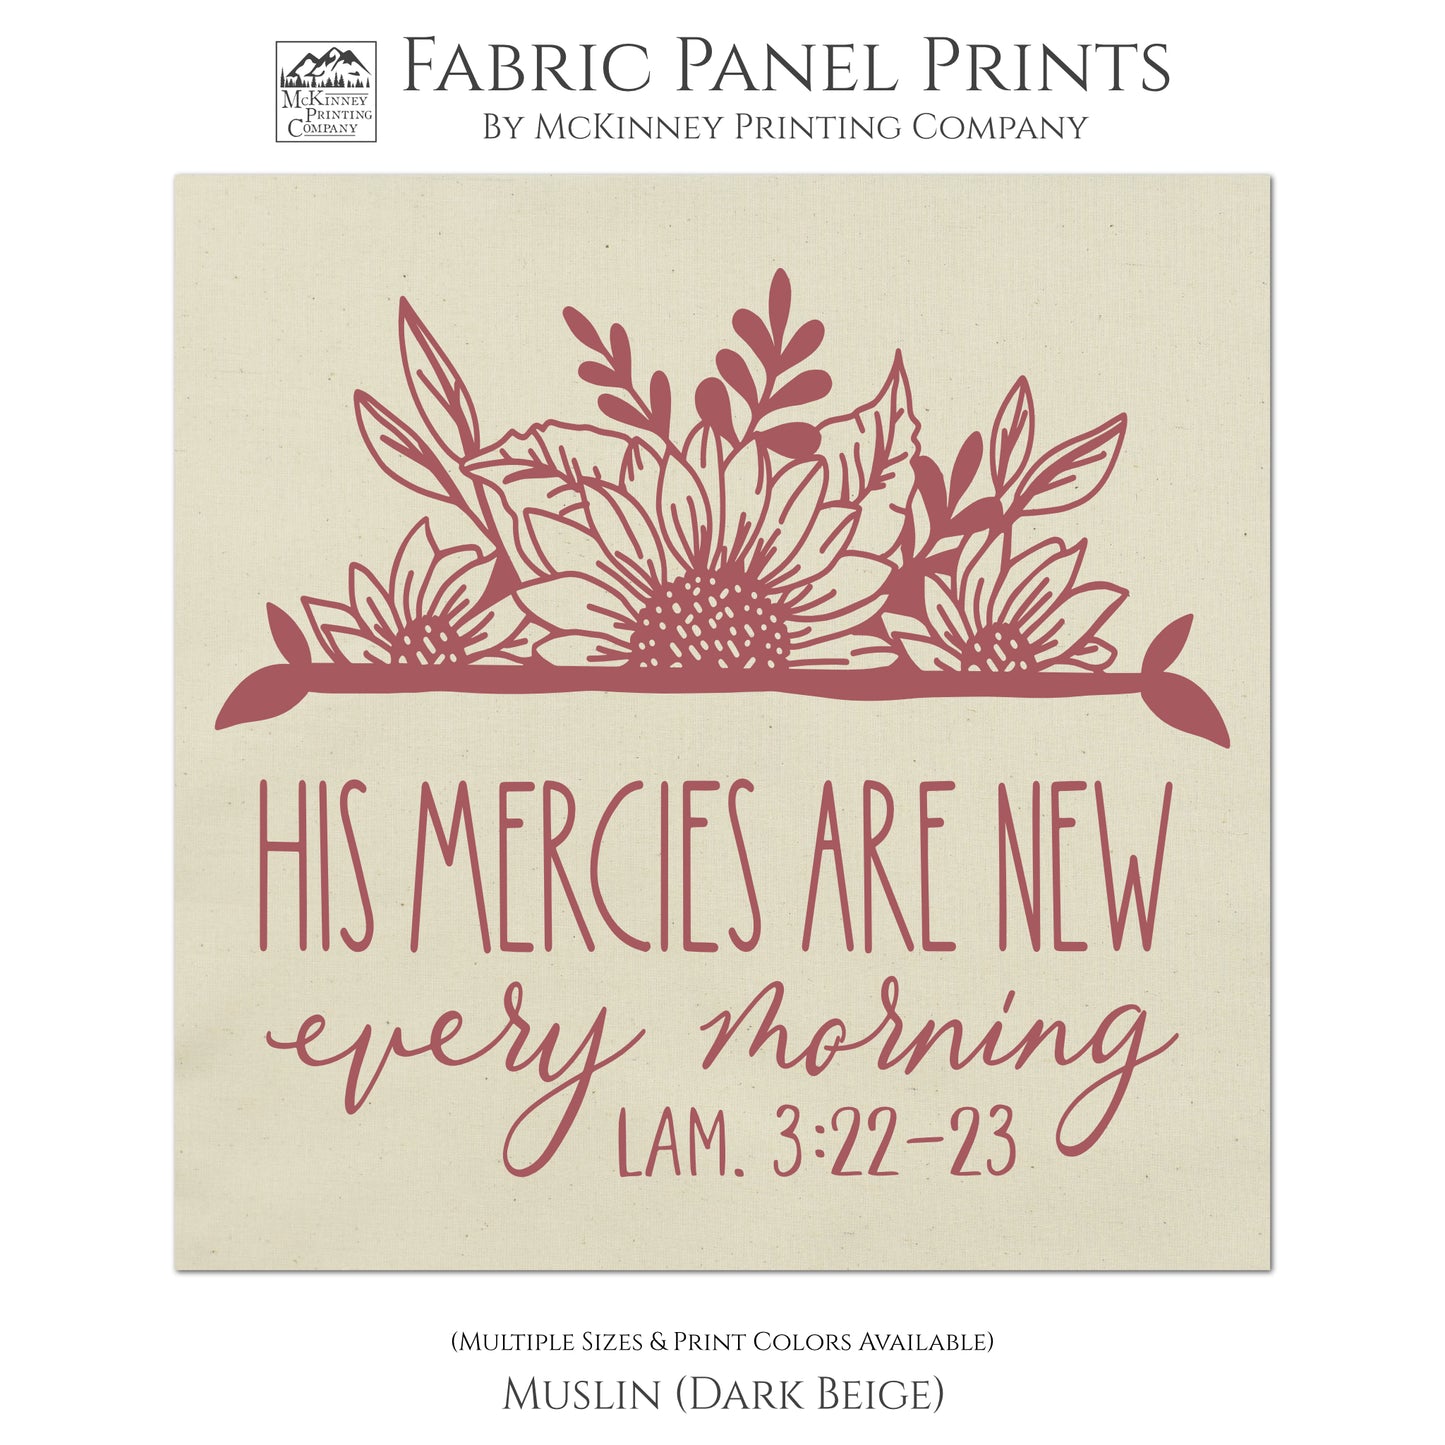 His mercies are new every morning - Lamentations 3 22, Quotes About Life, Inspirational, Religious Fabric, Christian Scripture, Fabric Panel Print, Quilt Block - Muslin